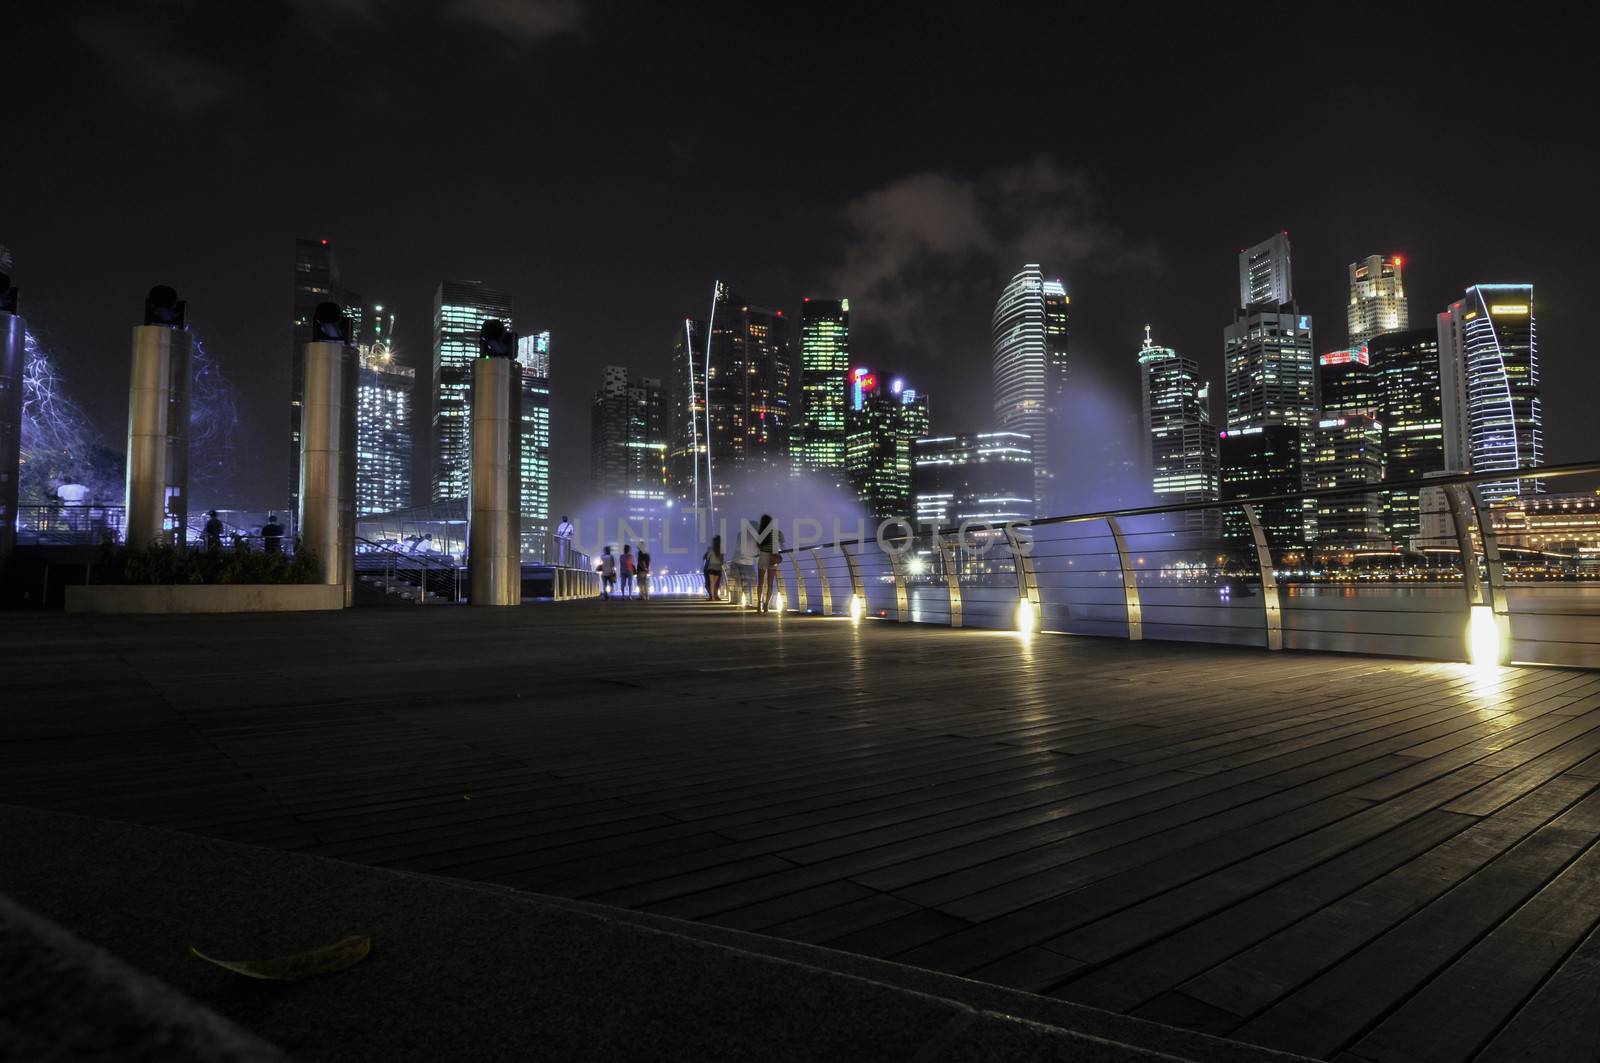 Singapore city skyline finacial district at night by weltreisendertj